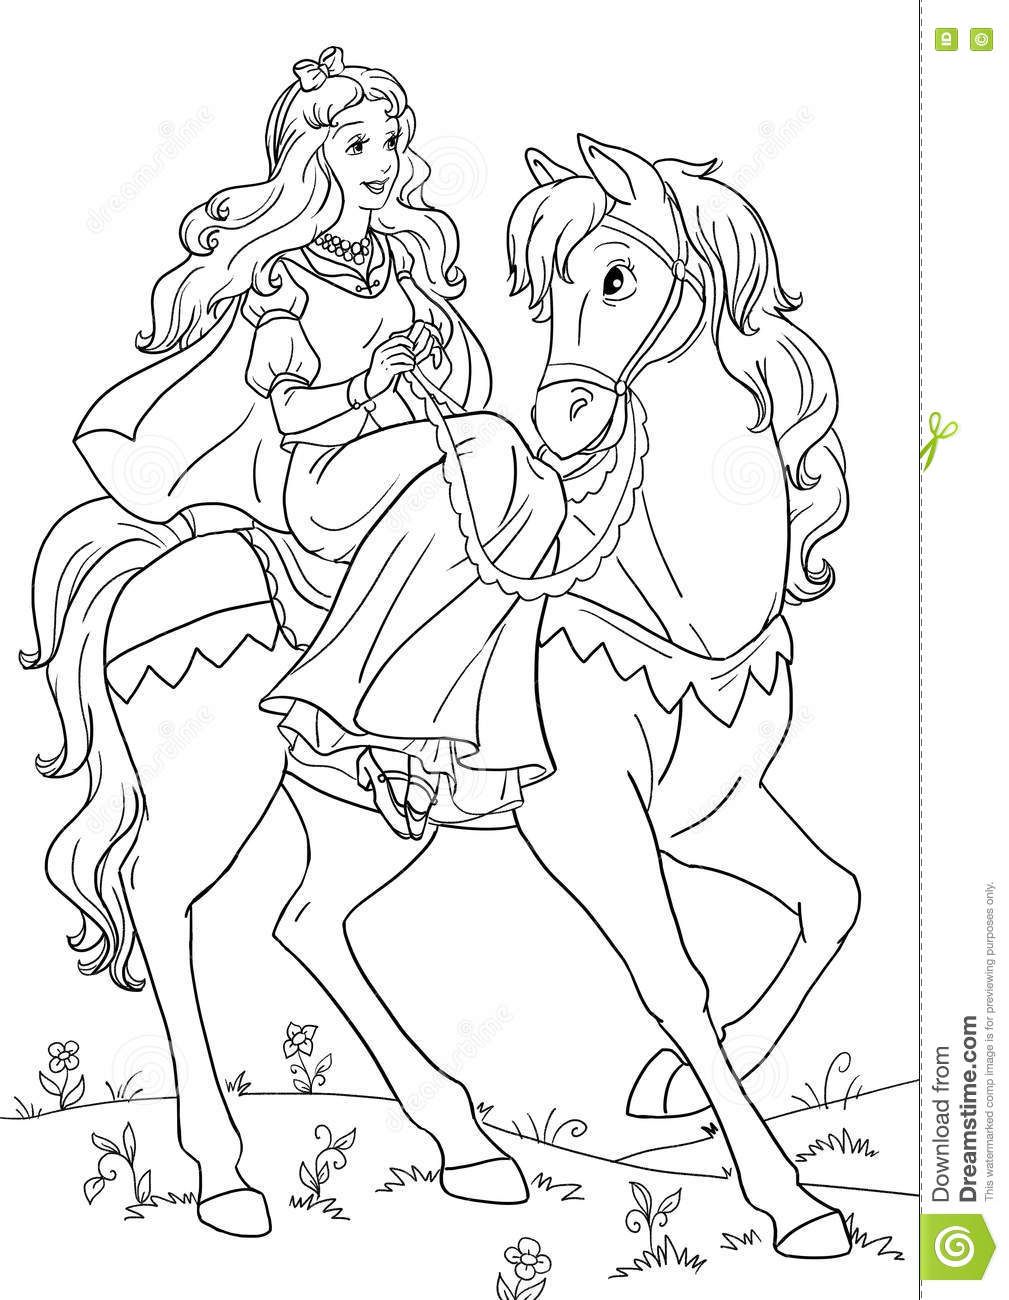 Horsed Princess   Unicorn Coloring Pages, Dinosaur Coloring Pages ...